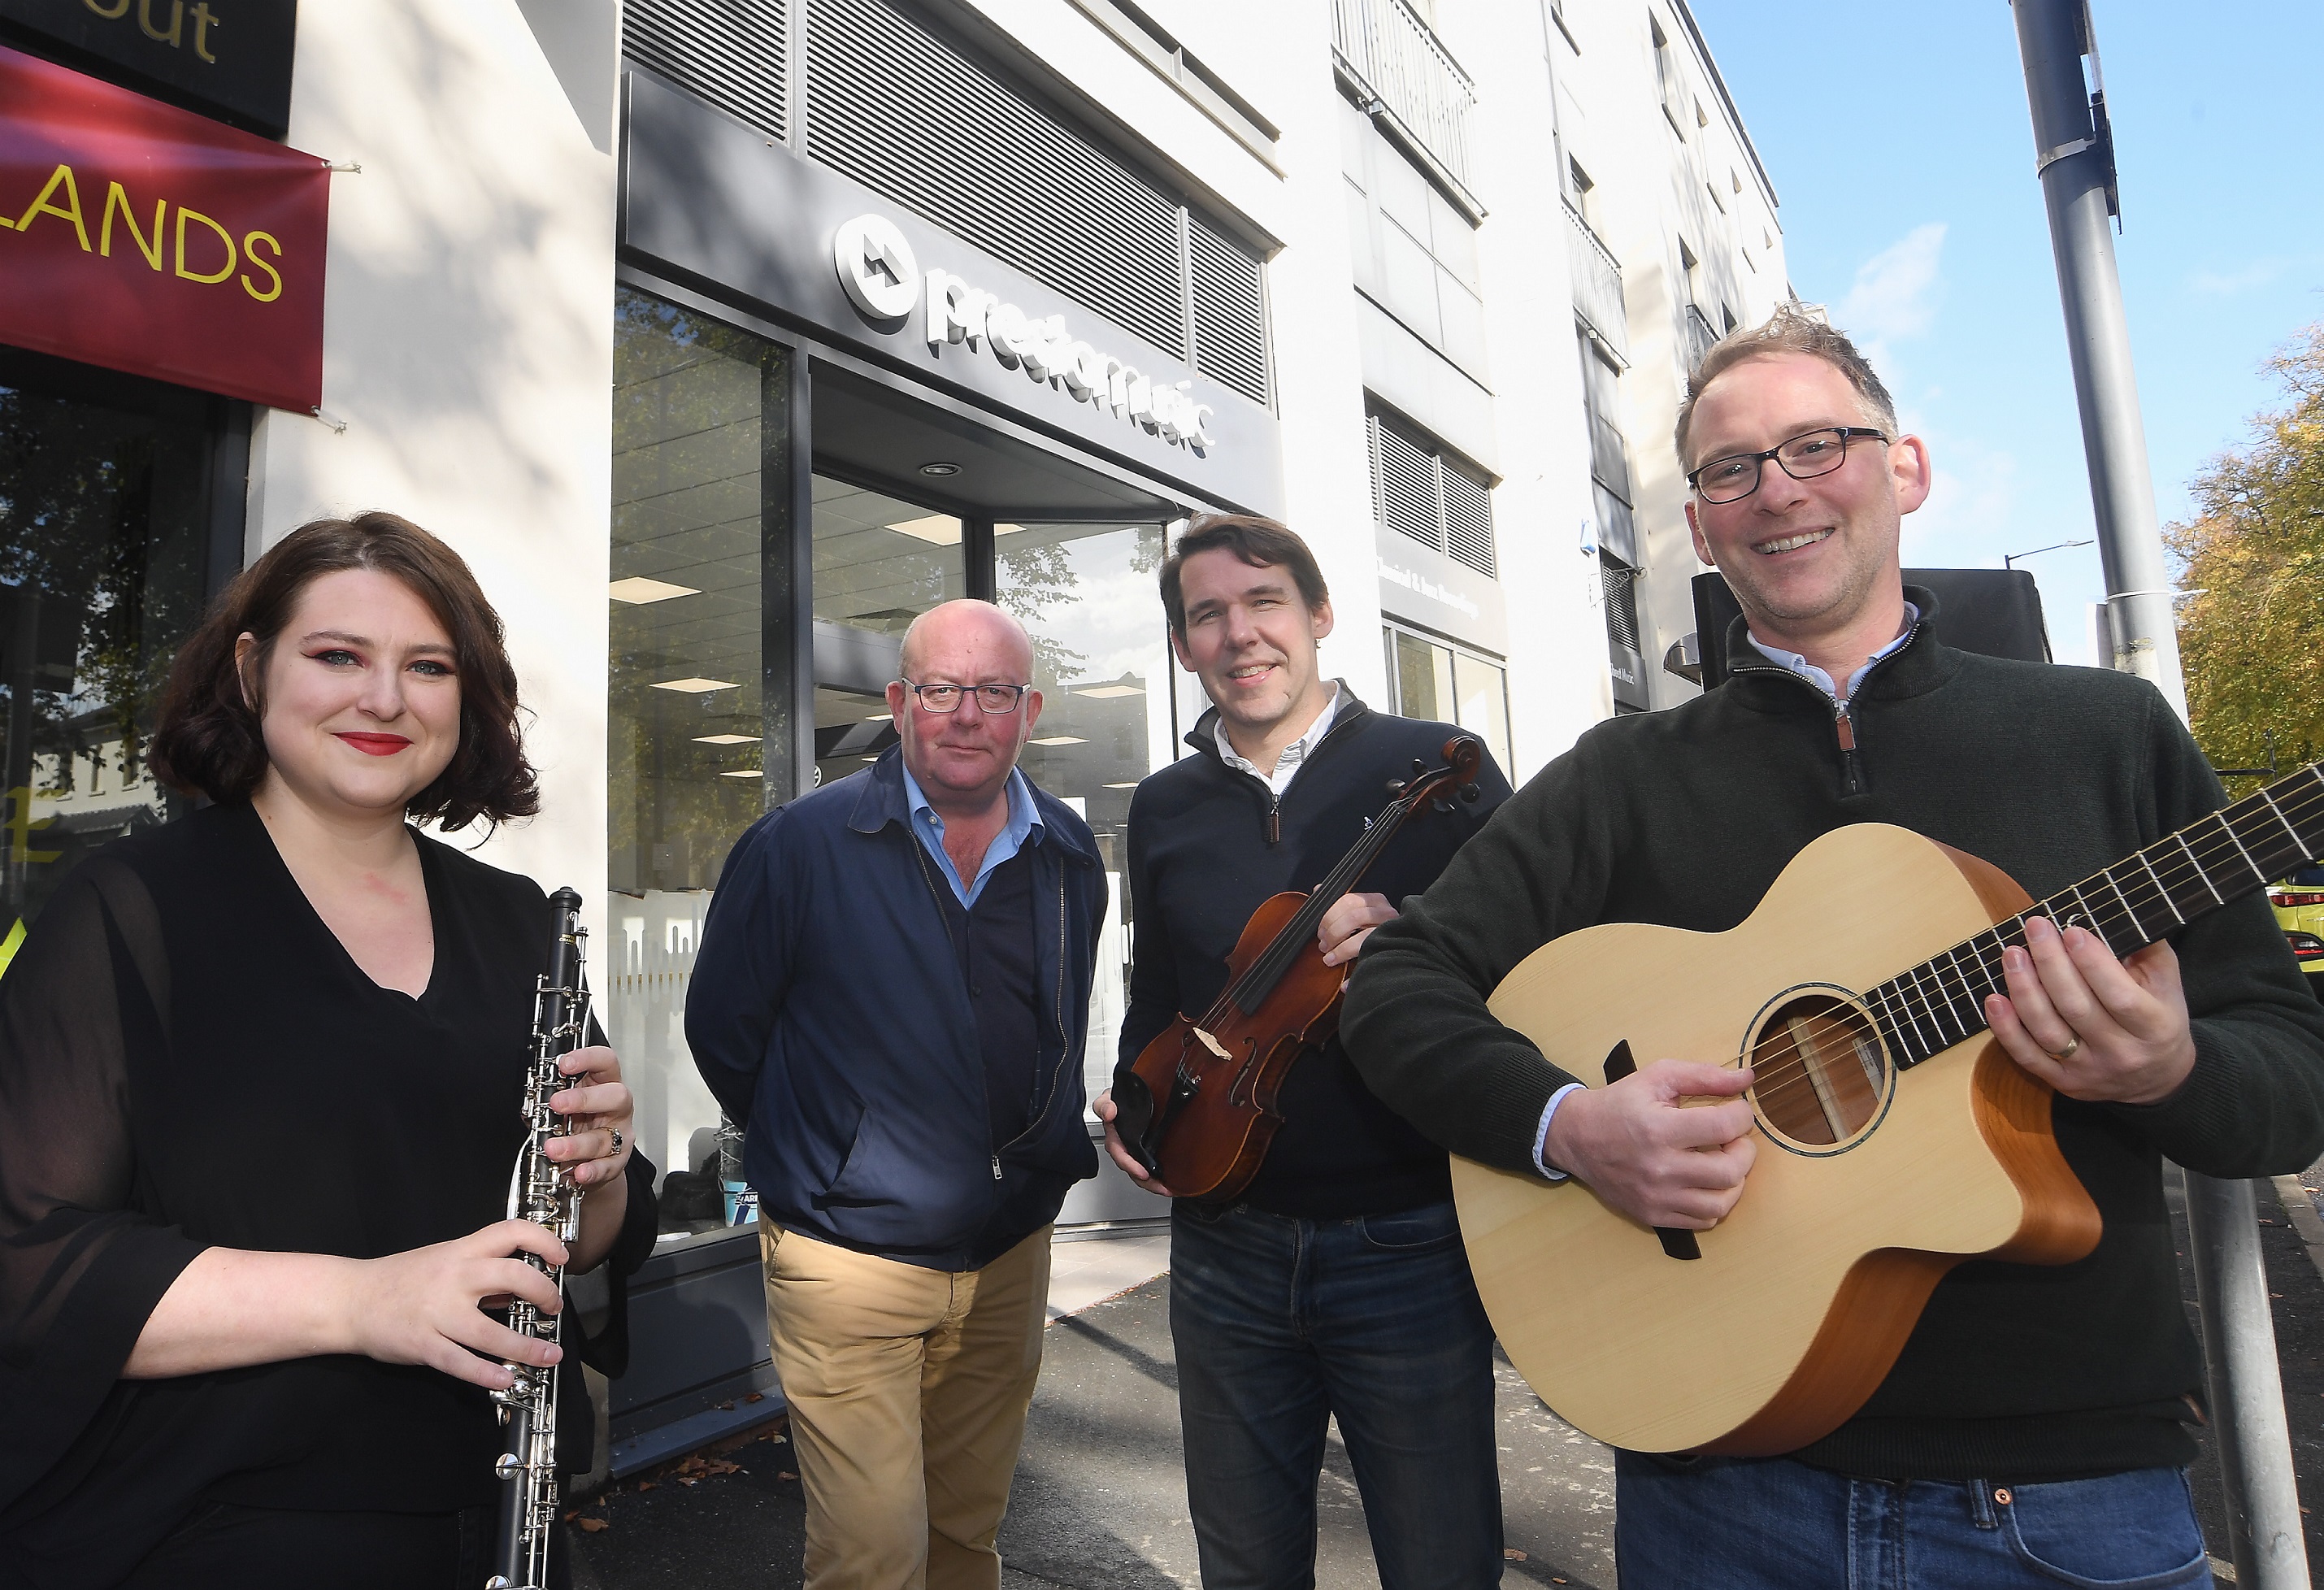 Leamington music shop to move to bigger premises after Wareing & Co completes deal